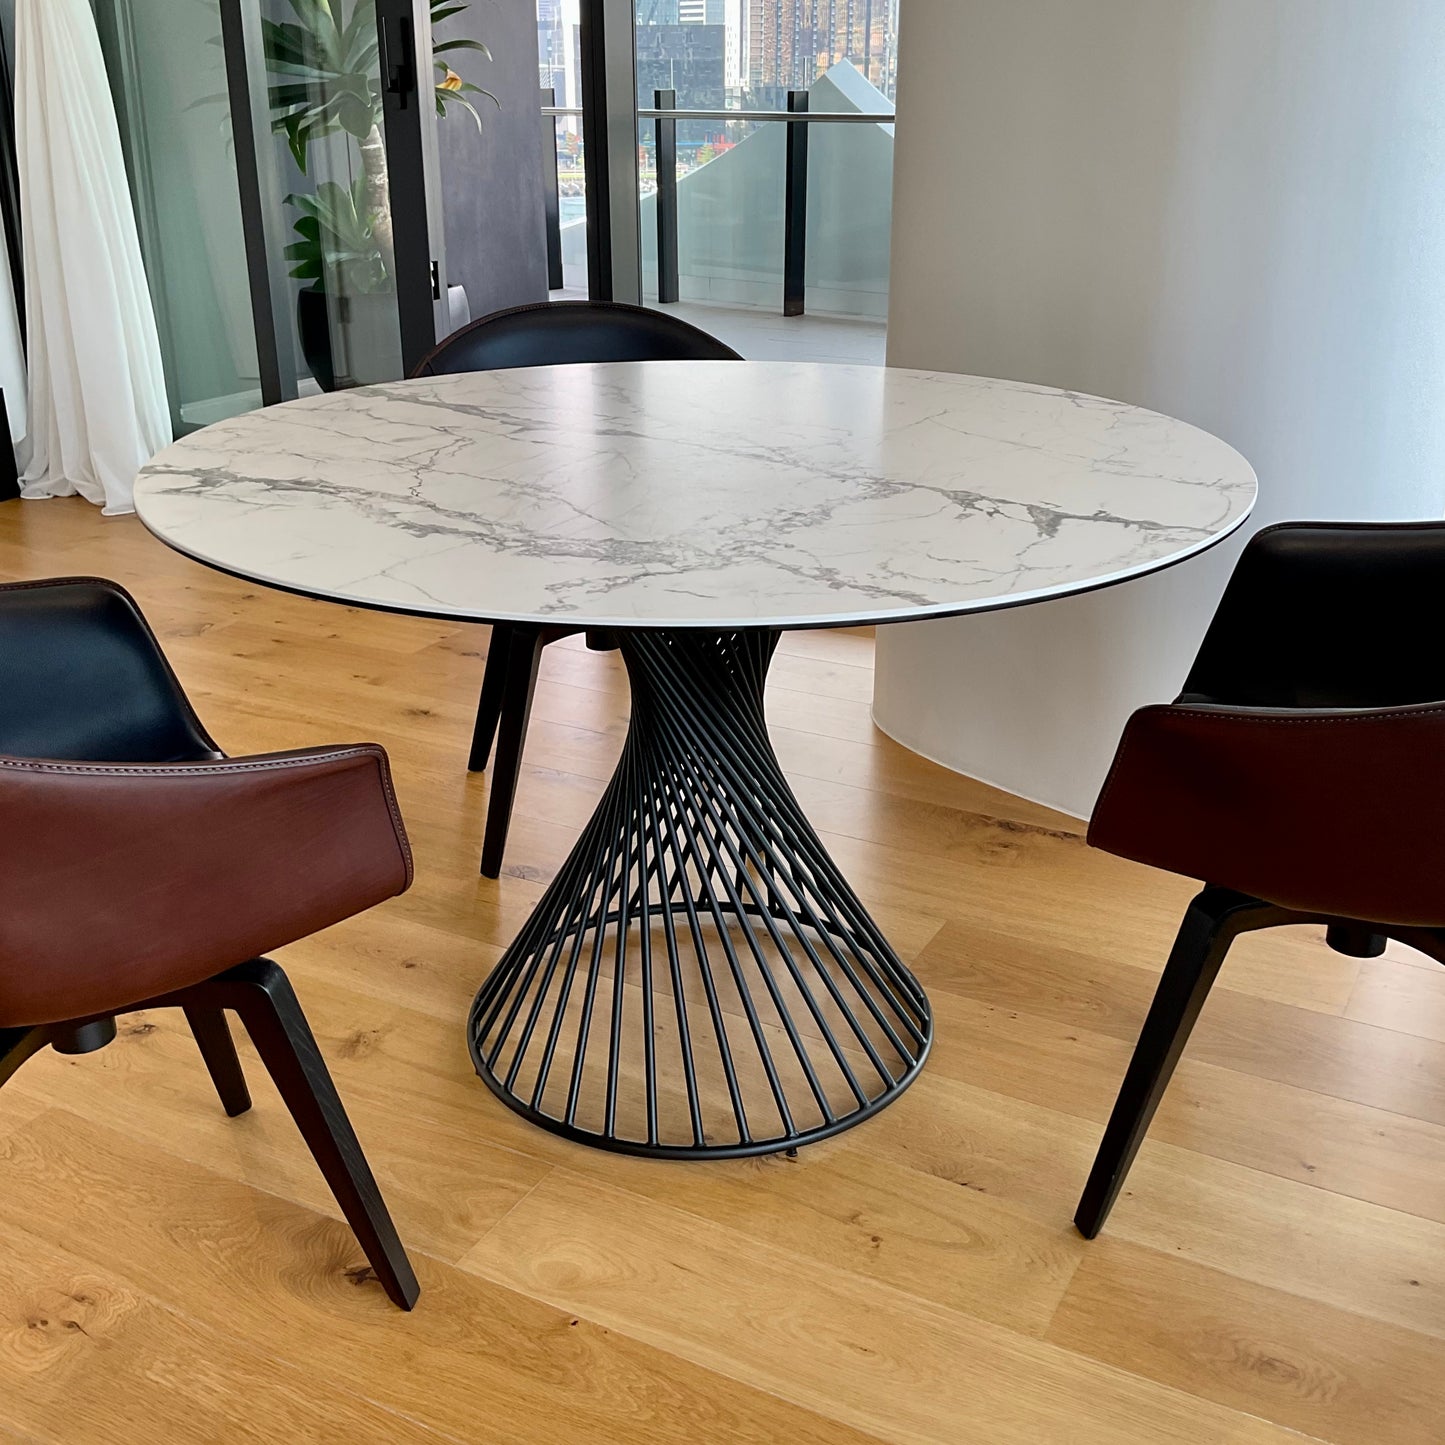 Load image into Gallery viewer, Vortex Round Dining Table by Calligaris through Voyager
